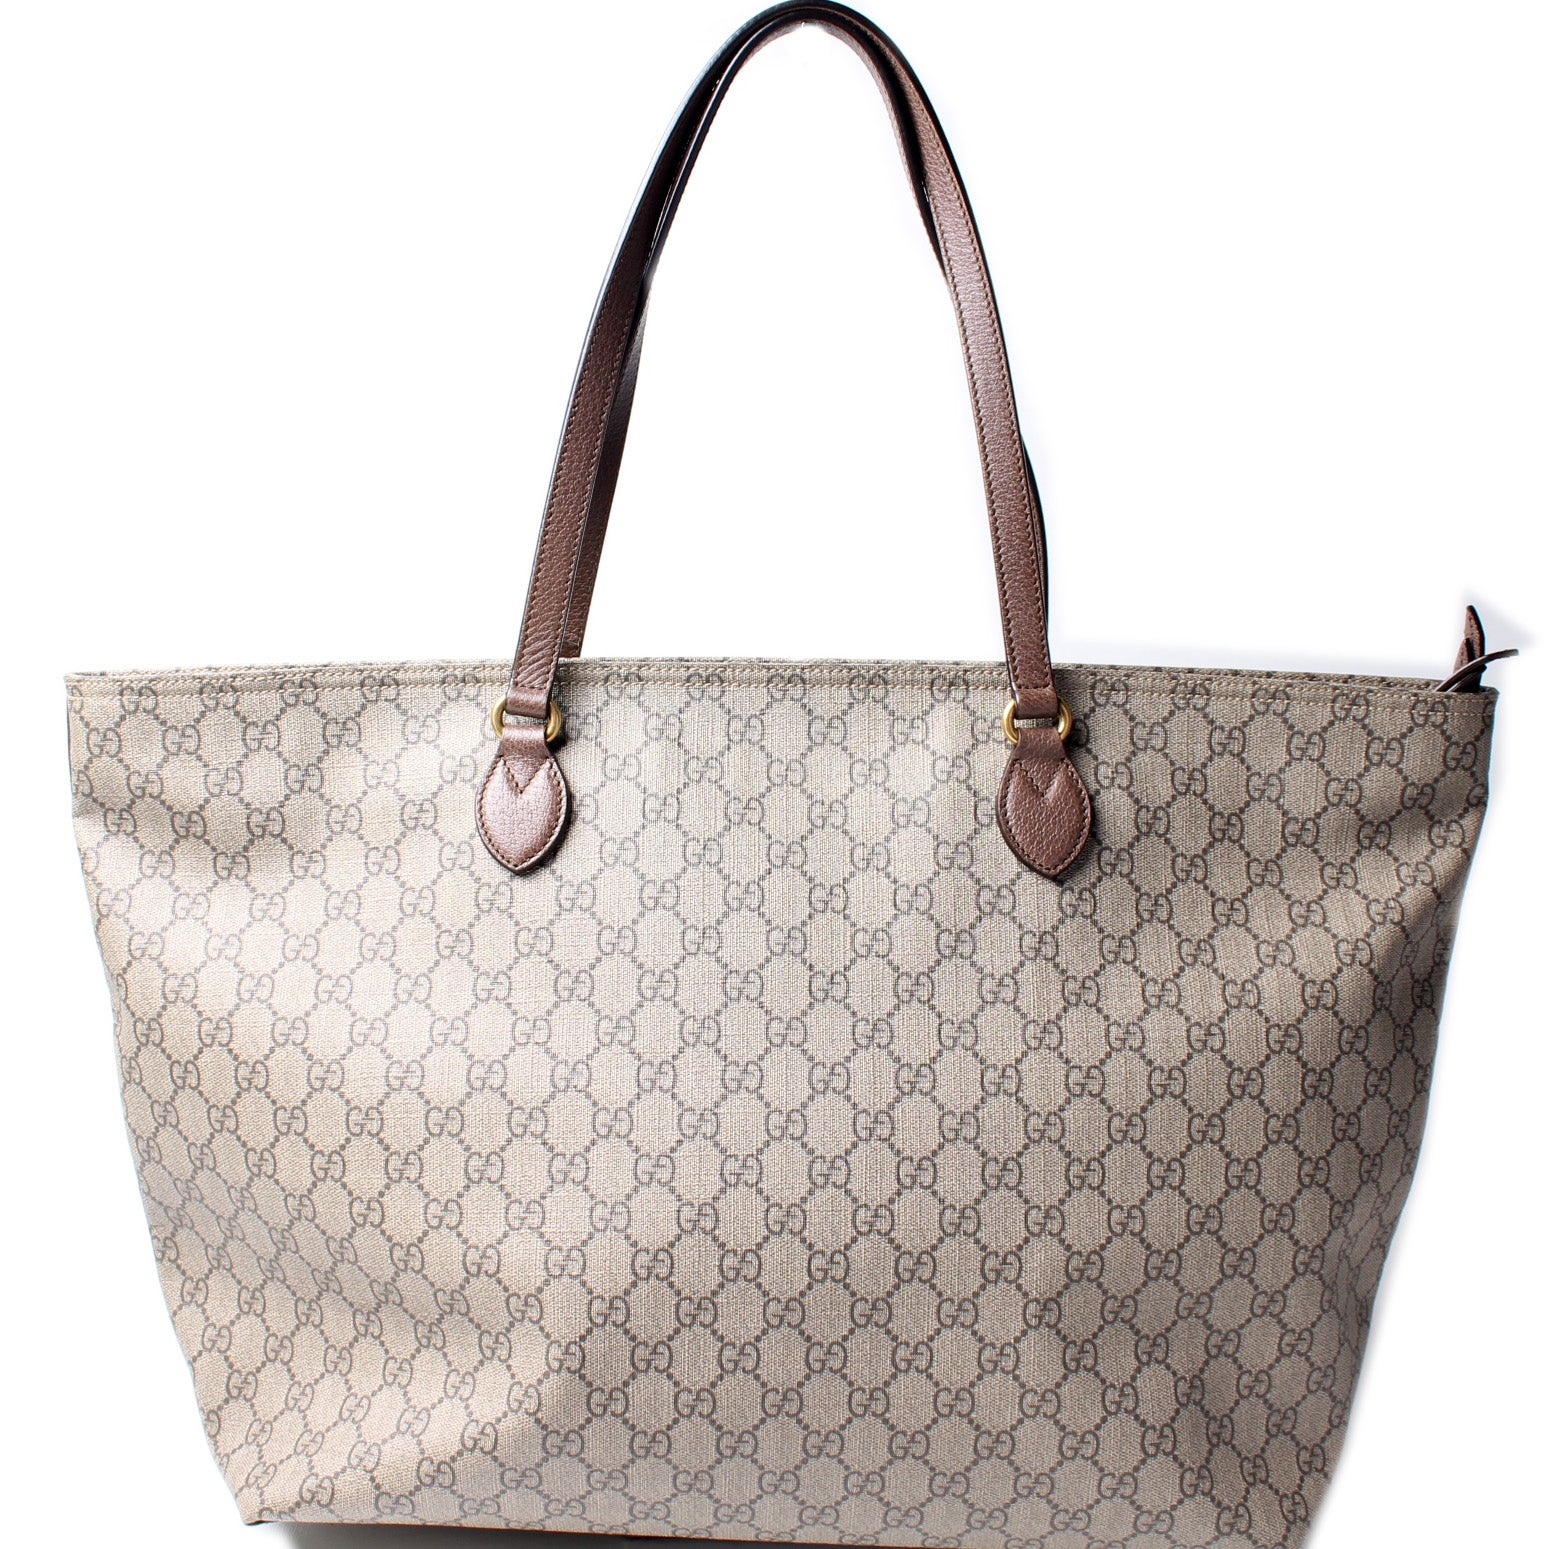 GUCCI - Ophidia GG medium tote bag With Dust Bag